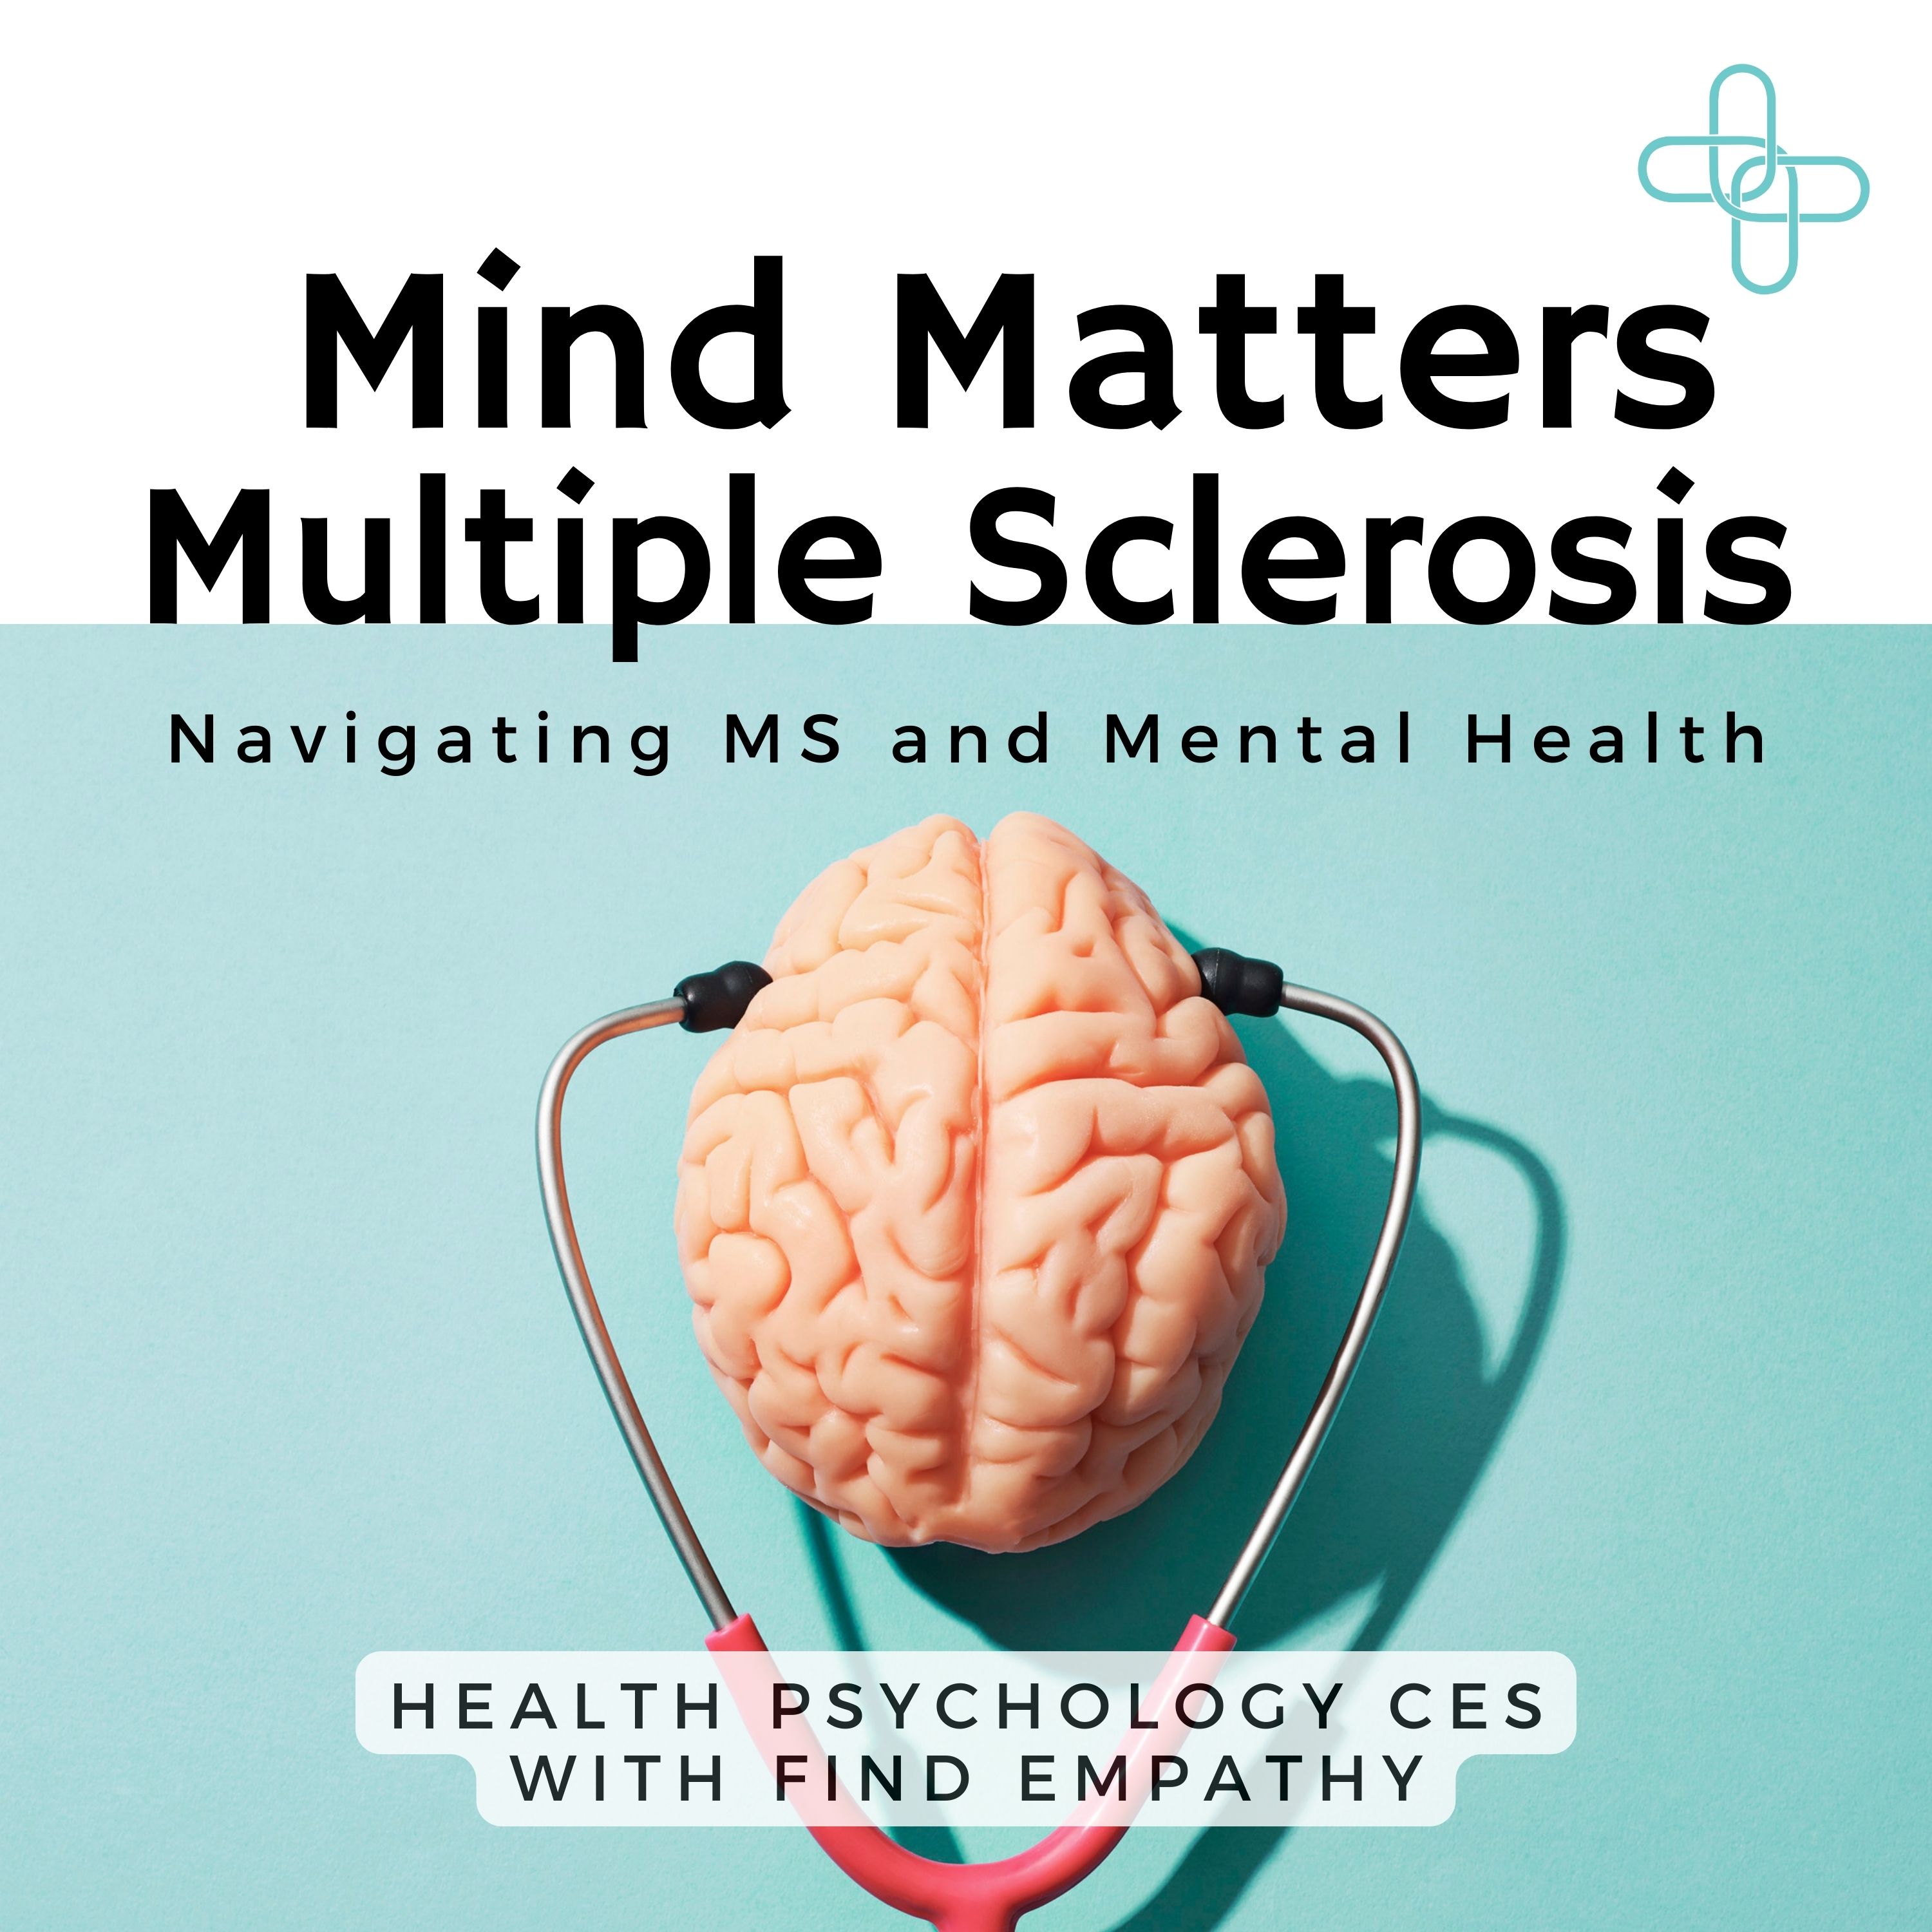 Multiple Sclerosis: What is it? How is it Diagnosed?